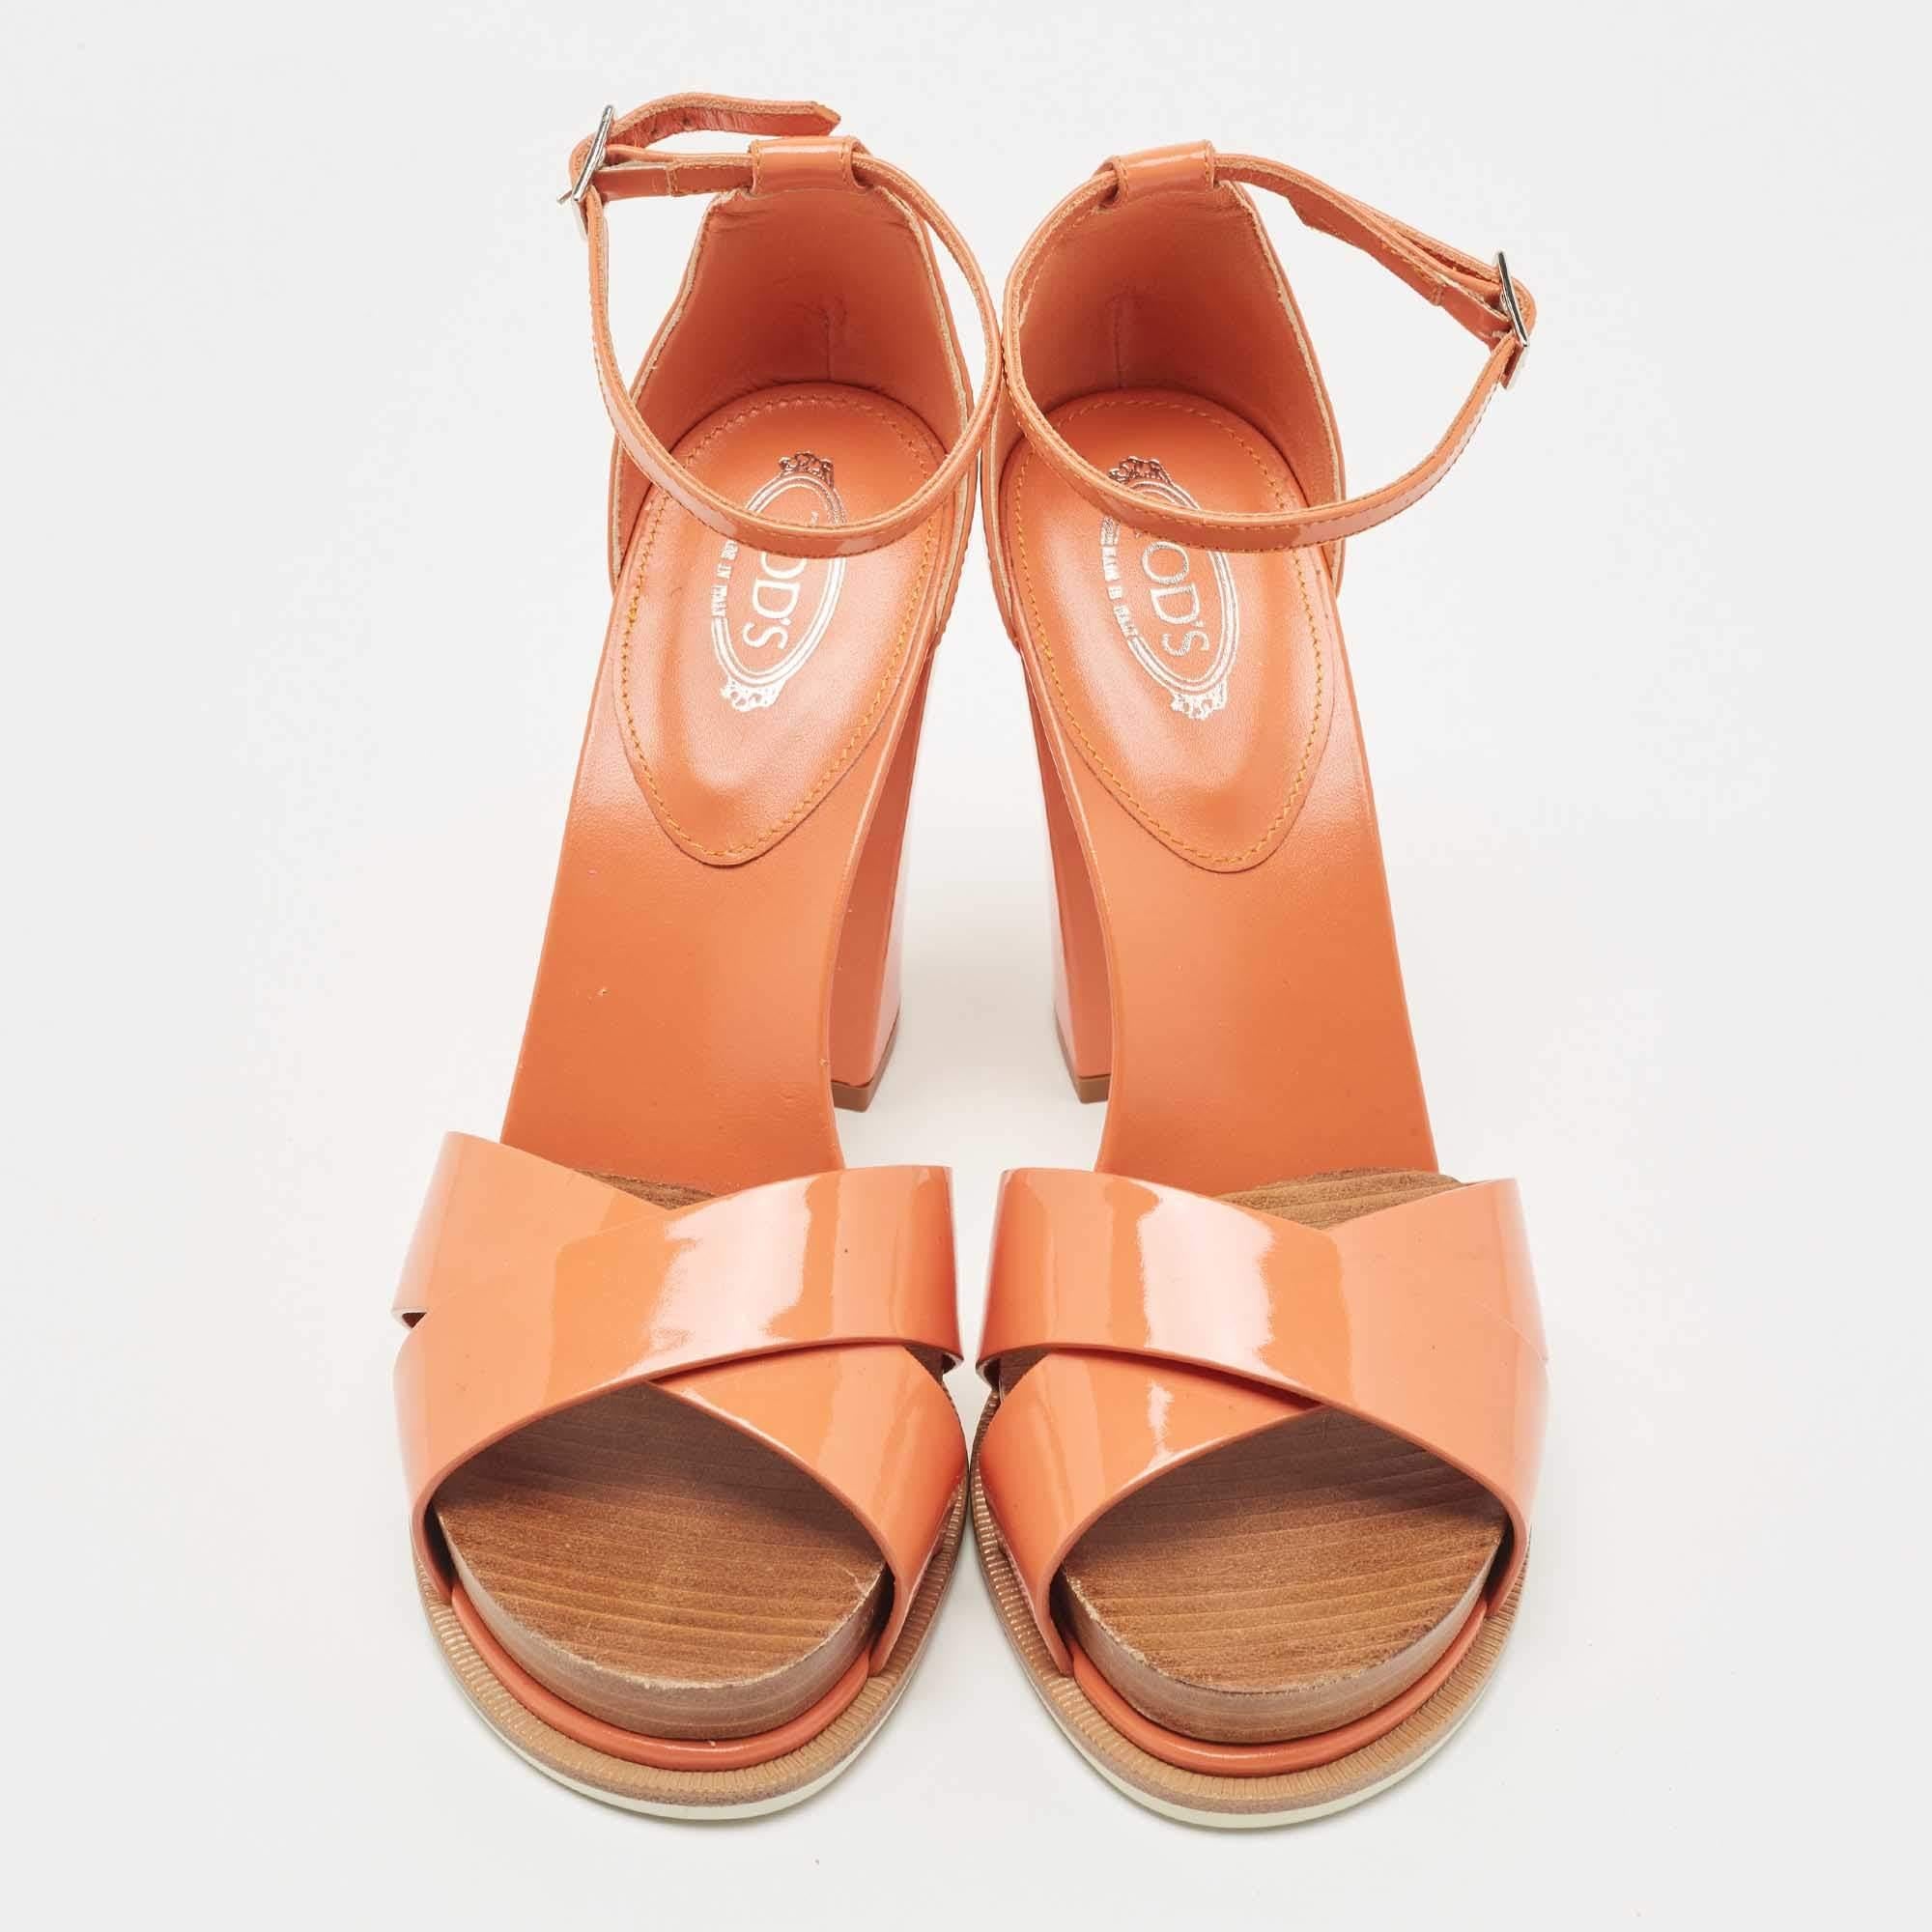 These Tod's sandals will frame your feet in an elegant manner. Crafted from quality materials, they flaunt a classy display, comfortable insoles & durable heels.

